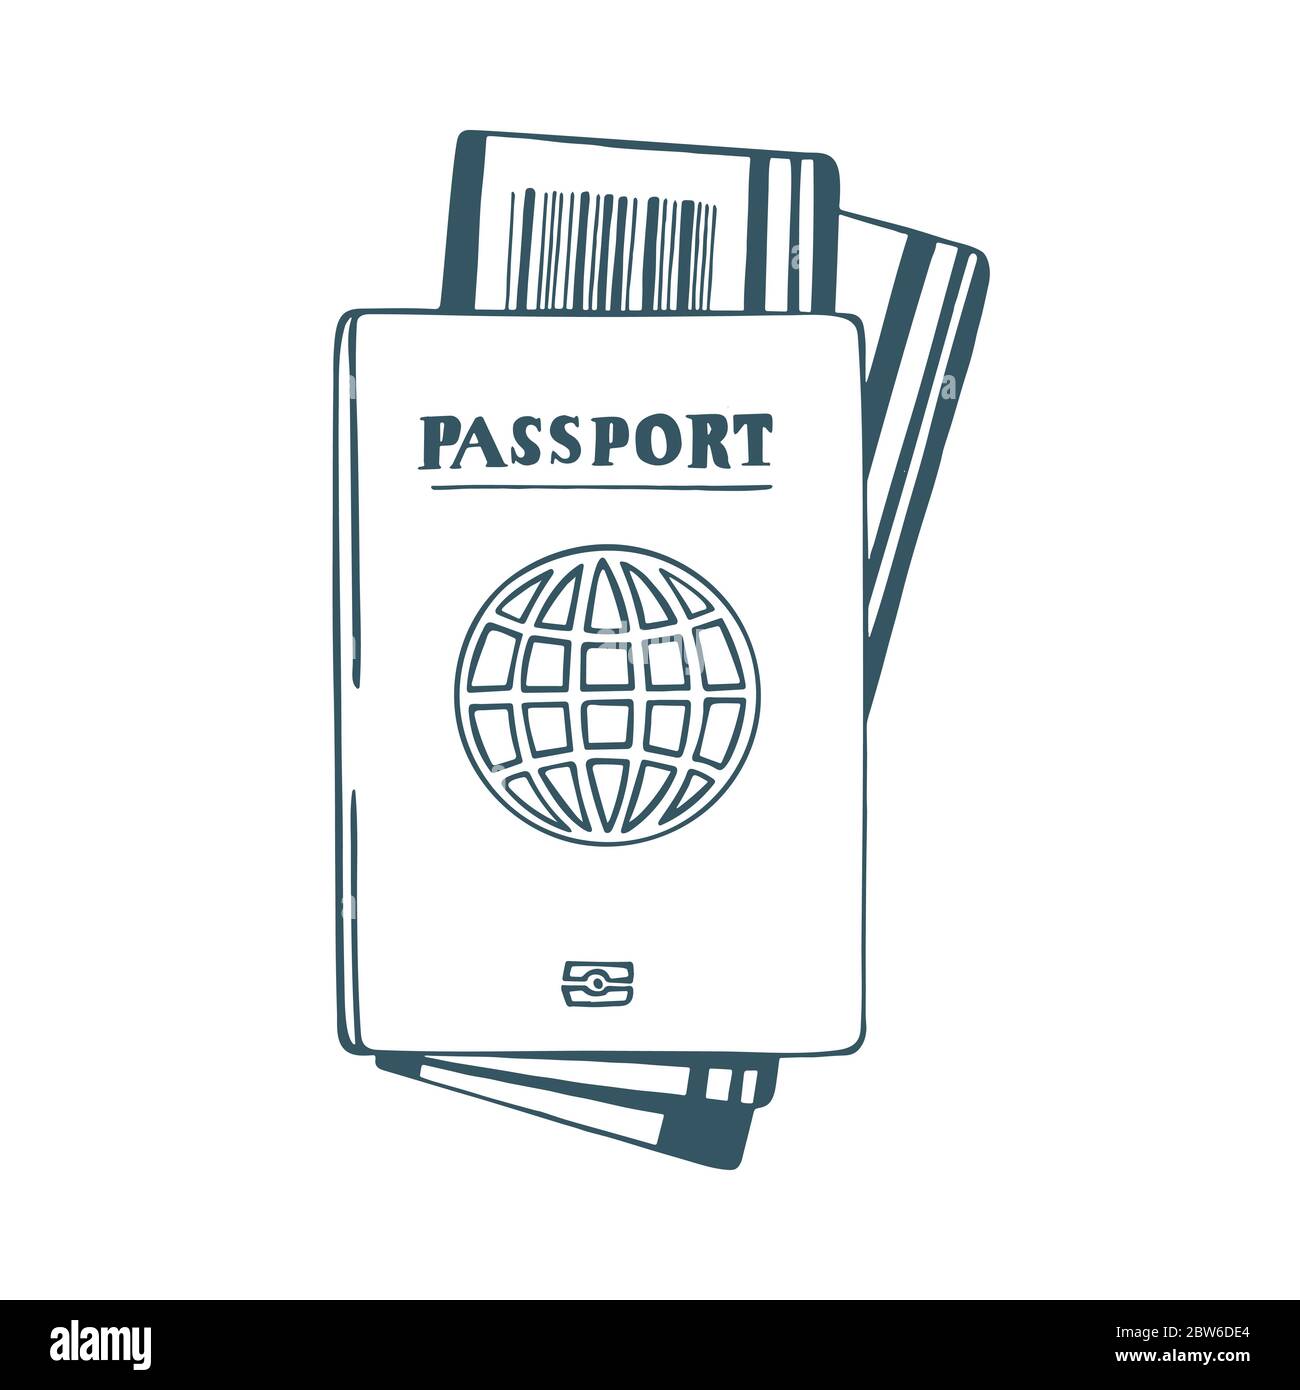 Passport and tickets hand drawn vector illustration. Travel concept sketch drawing. Part of set. Stock Vector